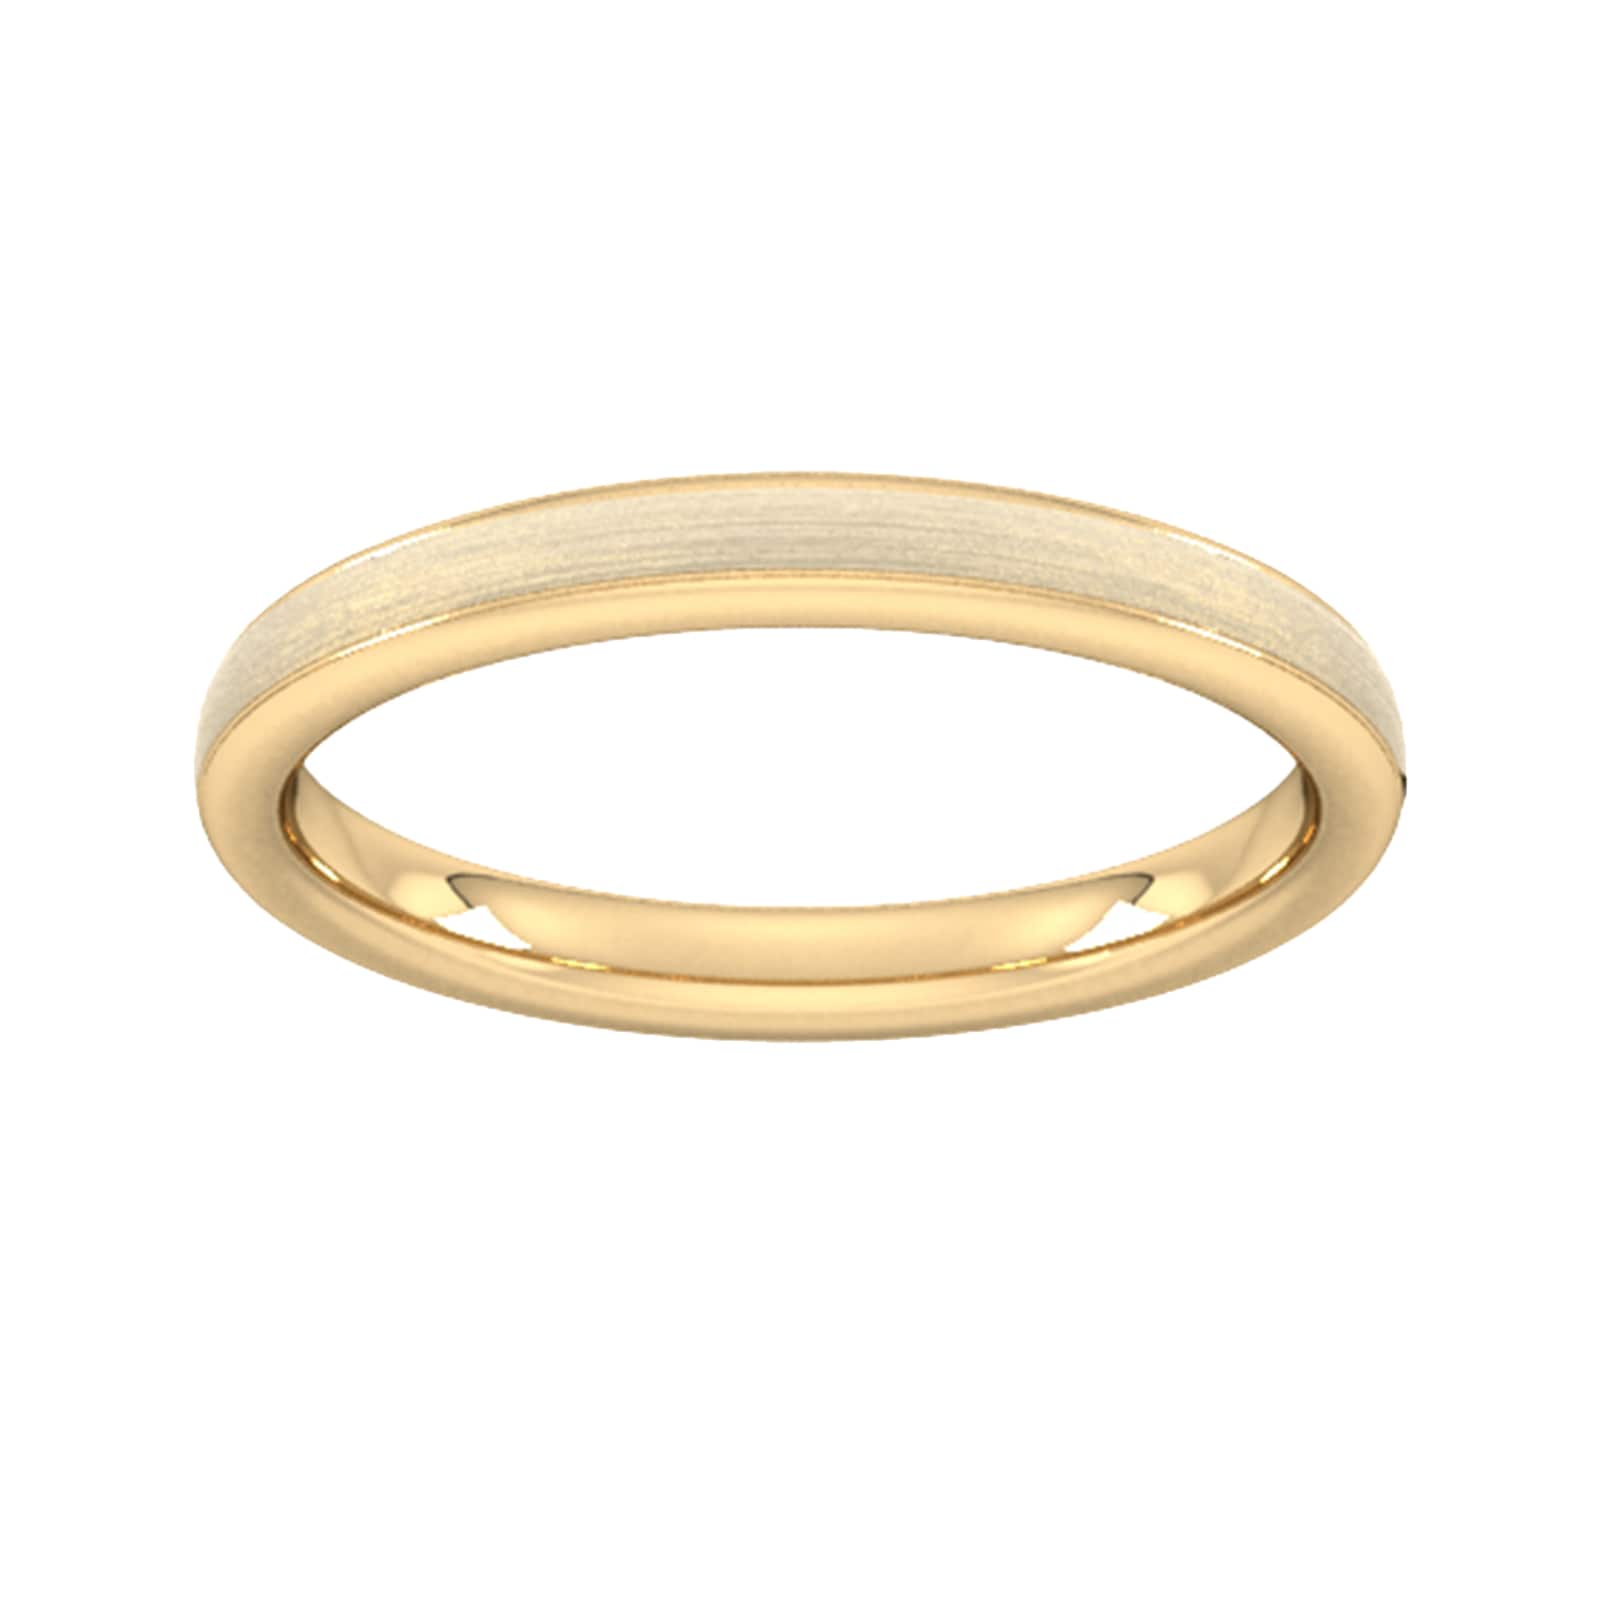 2.5mm Slight Court Extra Heavy Matt Centre With Grooves Wedding Ring In 18 Carat Yellow Gold - Ring Size K